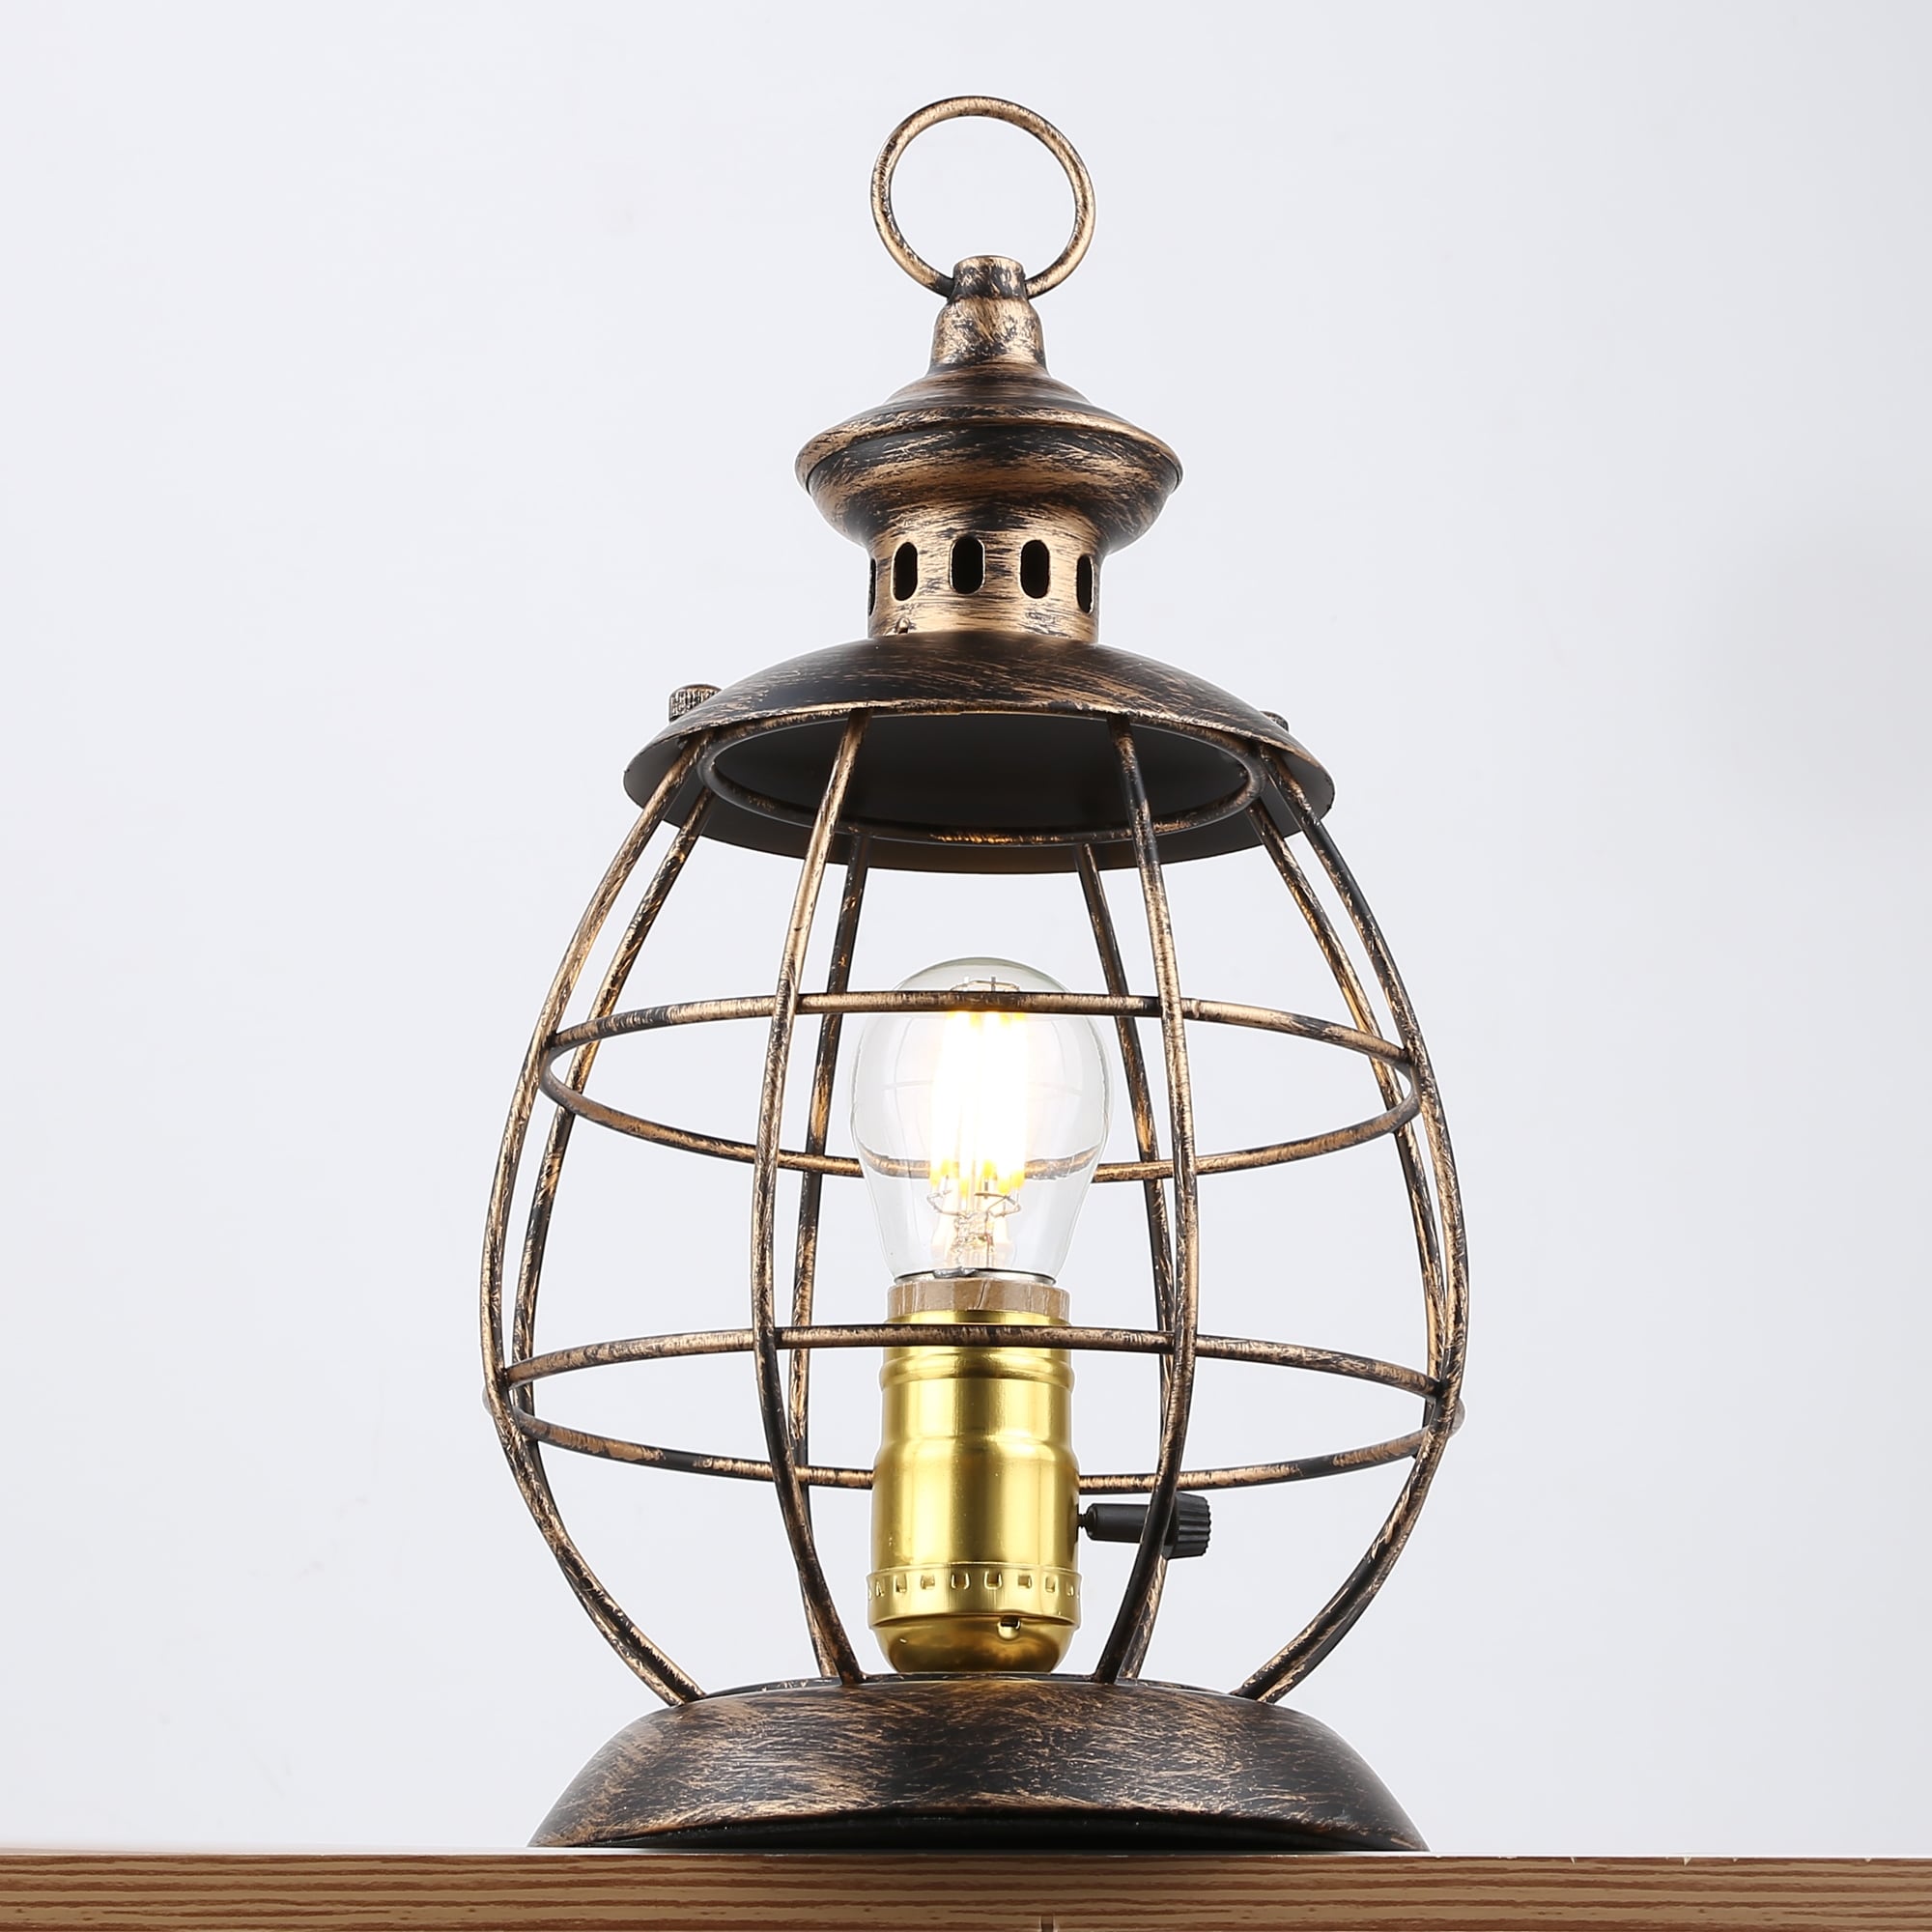 https://ak1.ostkcdn.com/images/products/is/images/direct/e06ac9a67b1baf807e6730943461a08eacddc206/Antique-Industrial-Modern-Electric-Lantern-Table-Lamp-for-Bedroom-Bedside%2C-Metal-Cage-Shade-Reading-Desk-Lamp-for-Living-Room.jpg